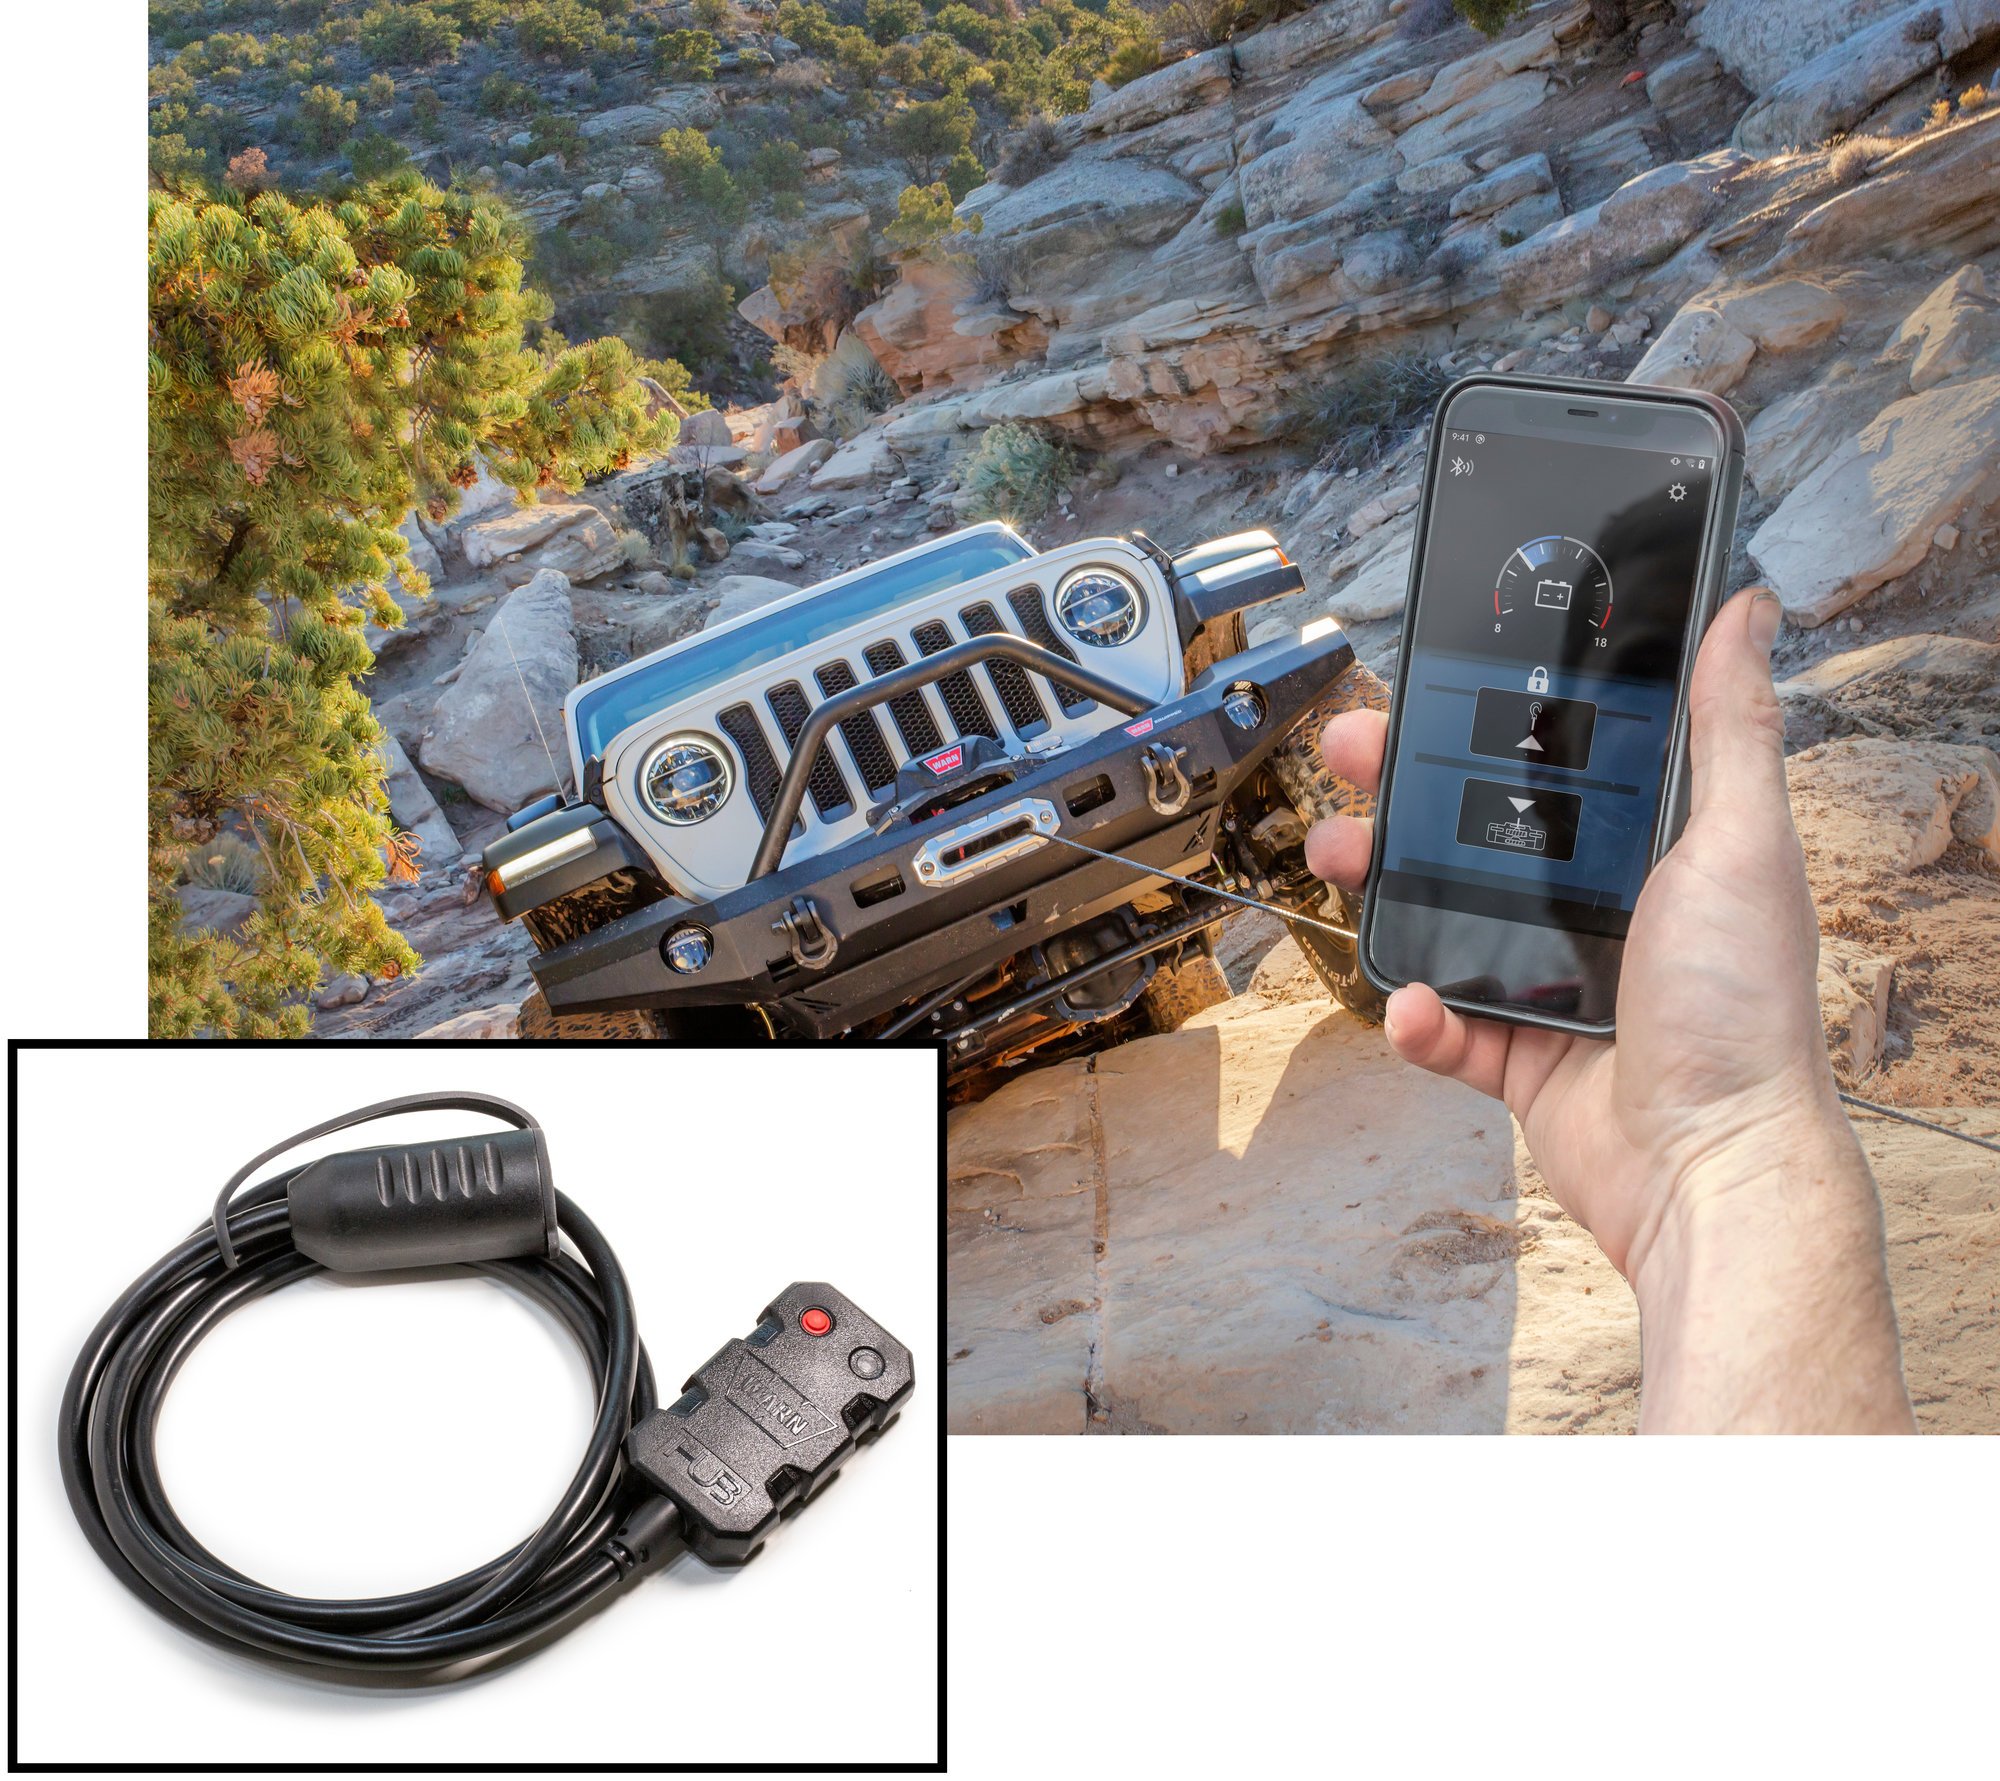 WARN 103945 HUB Wireless Receiver Smart Phone Enabled Winch Controller  for Jeep, Truck,  SUV WARN Winches Quadratec